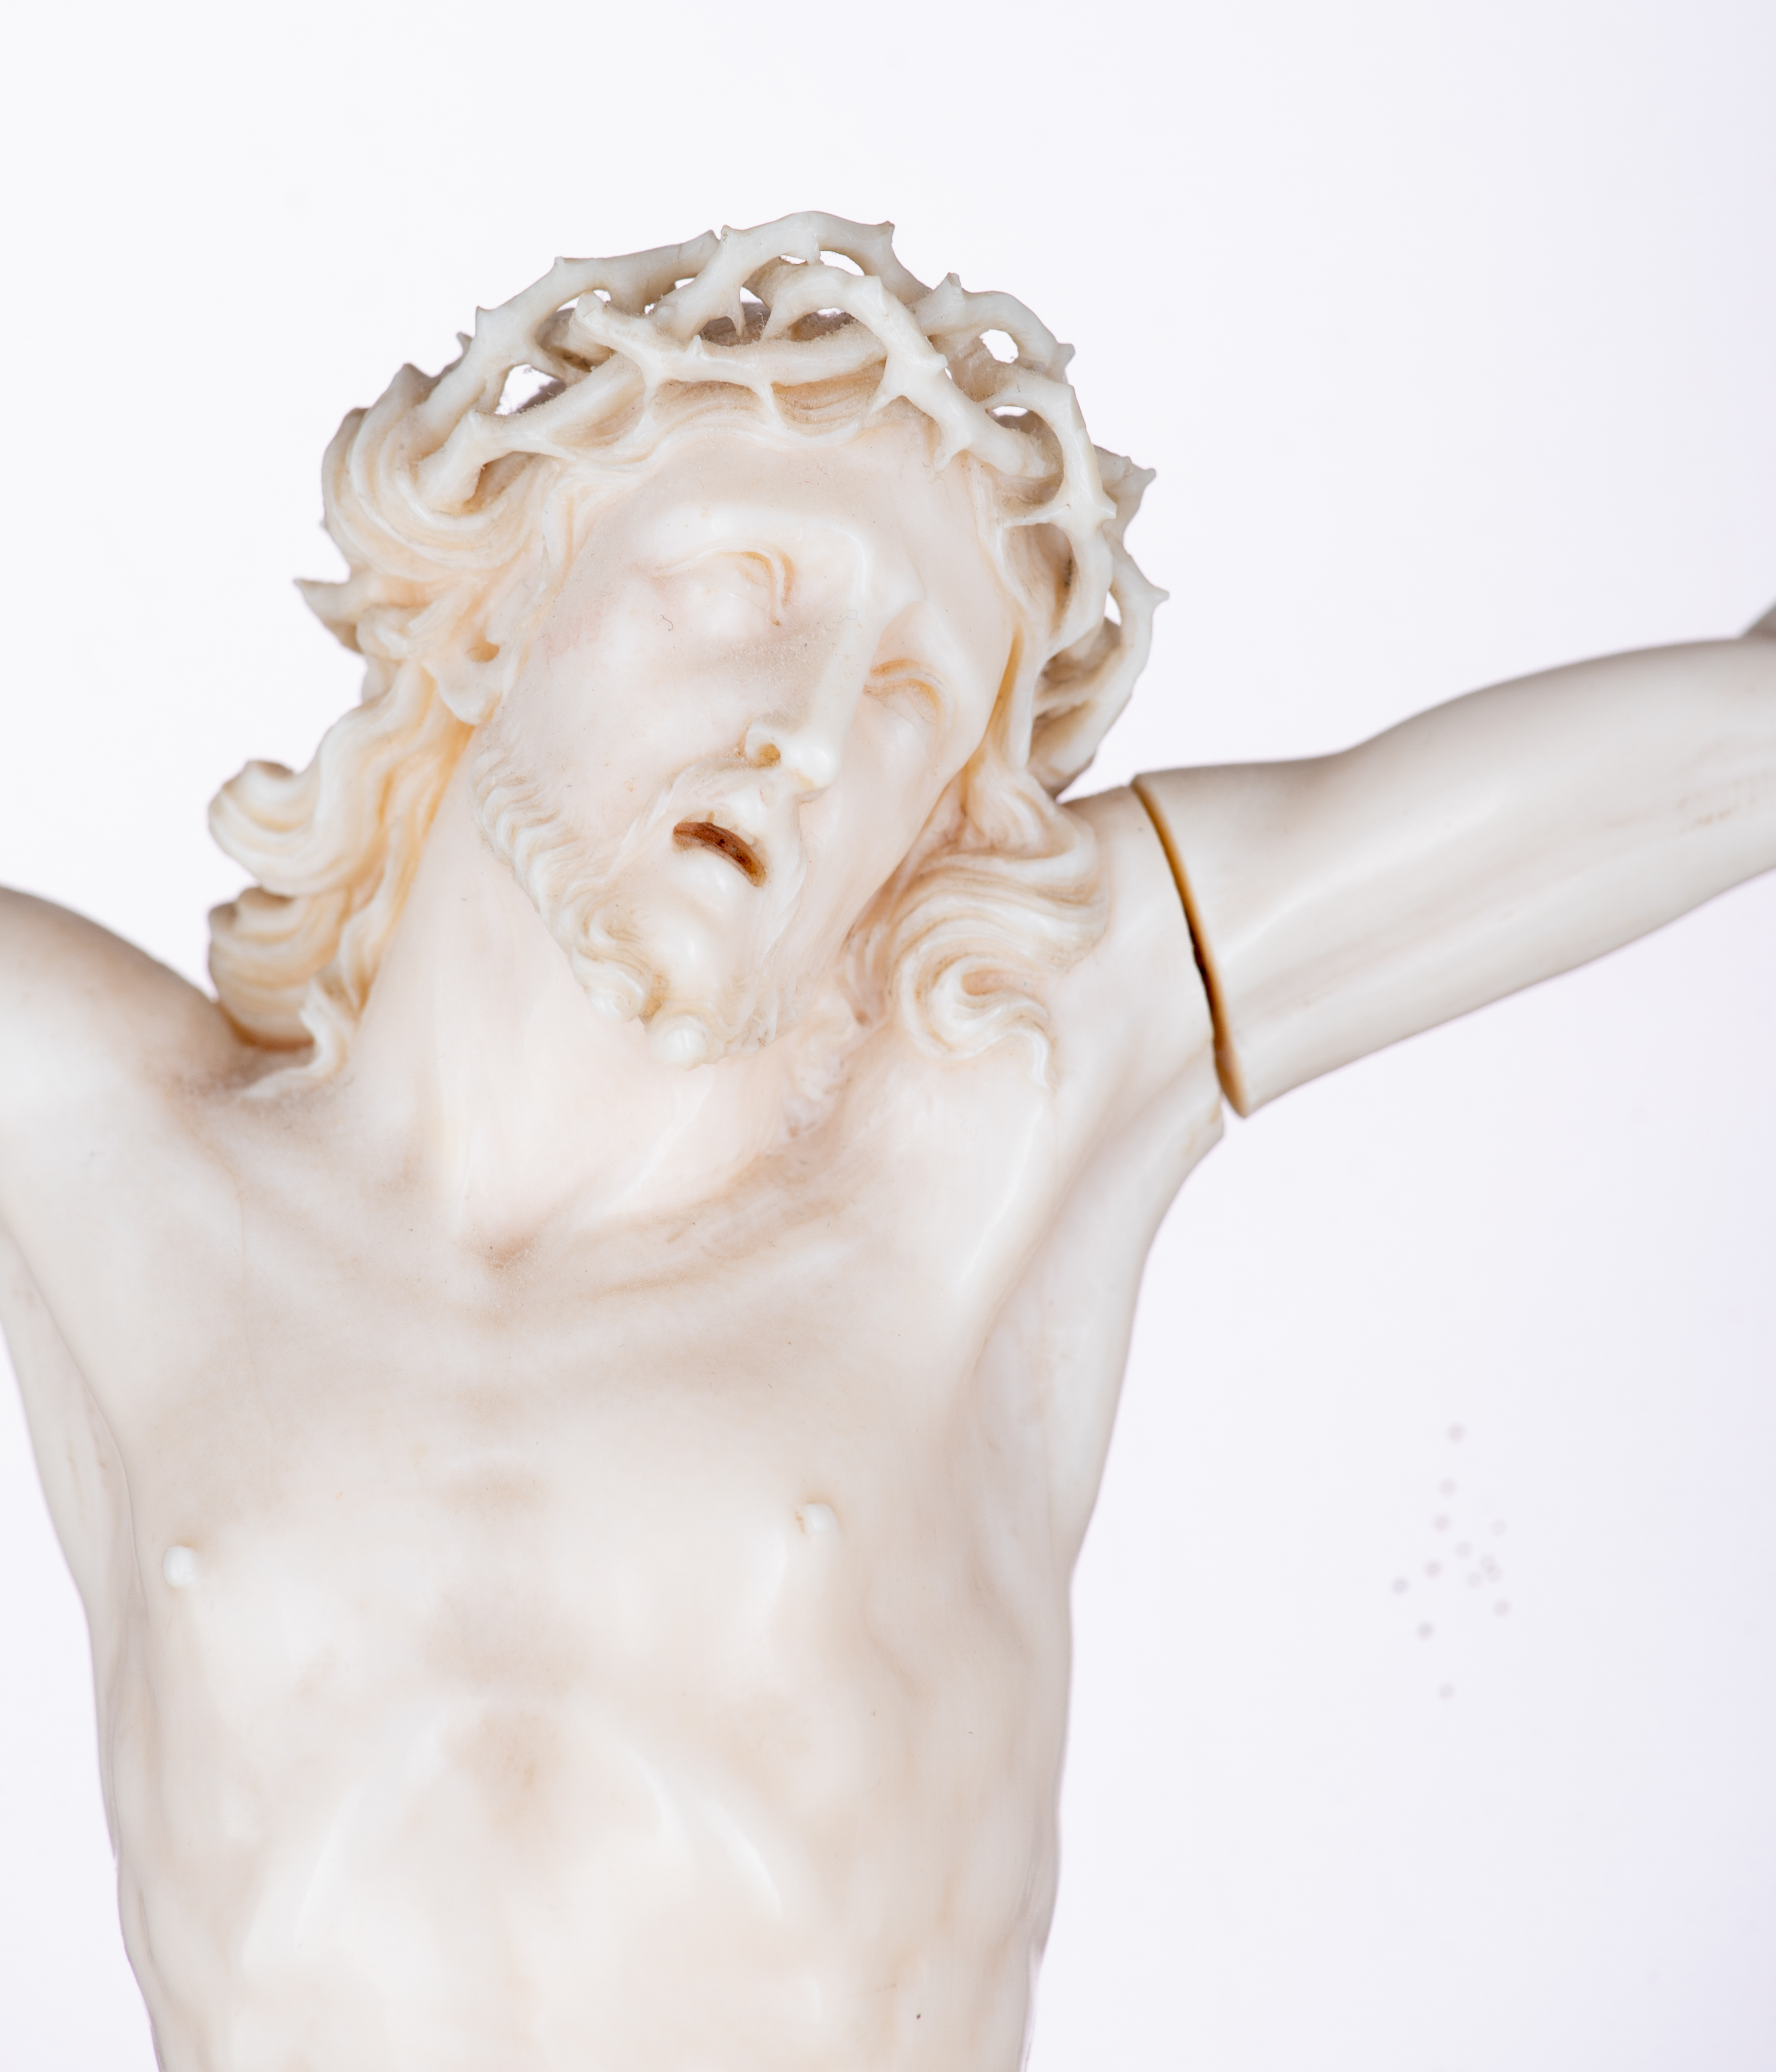 A finely sculpted ivory Corpus Christi on a plexi stand, 19thC, 20,3 x 27,5 cm (the Corpus Christi) - Image 4 of 8